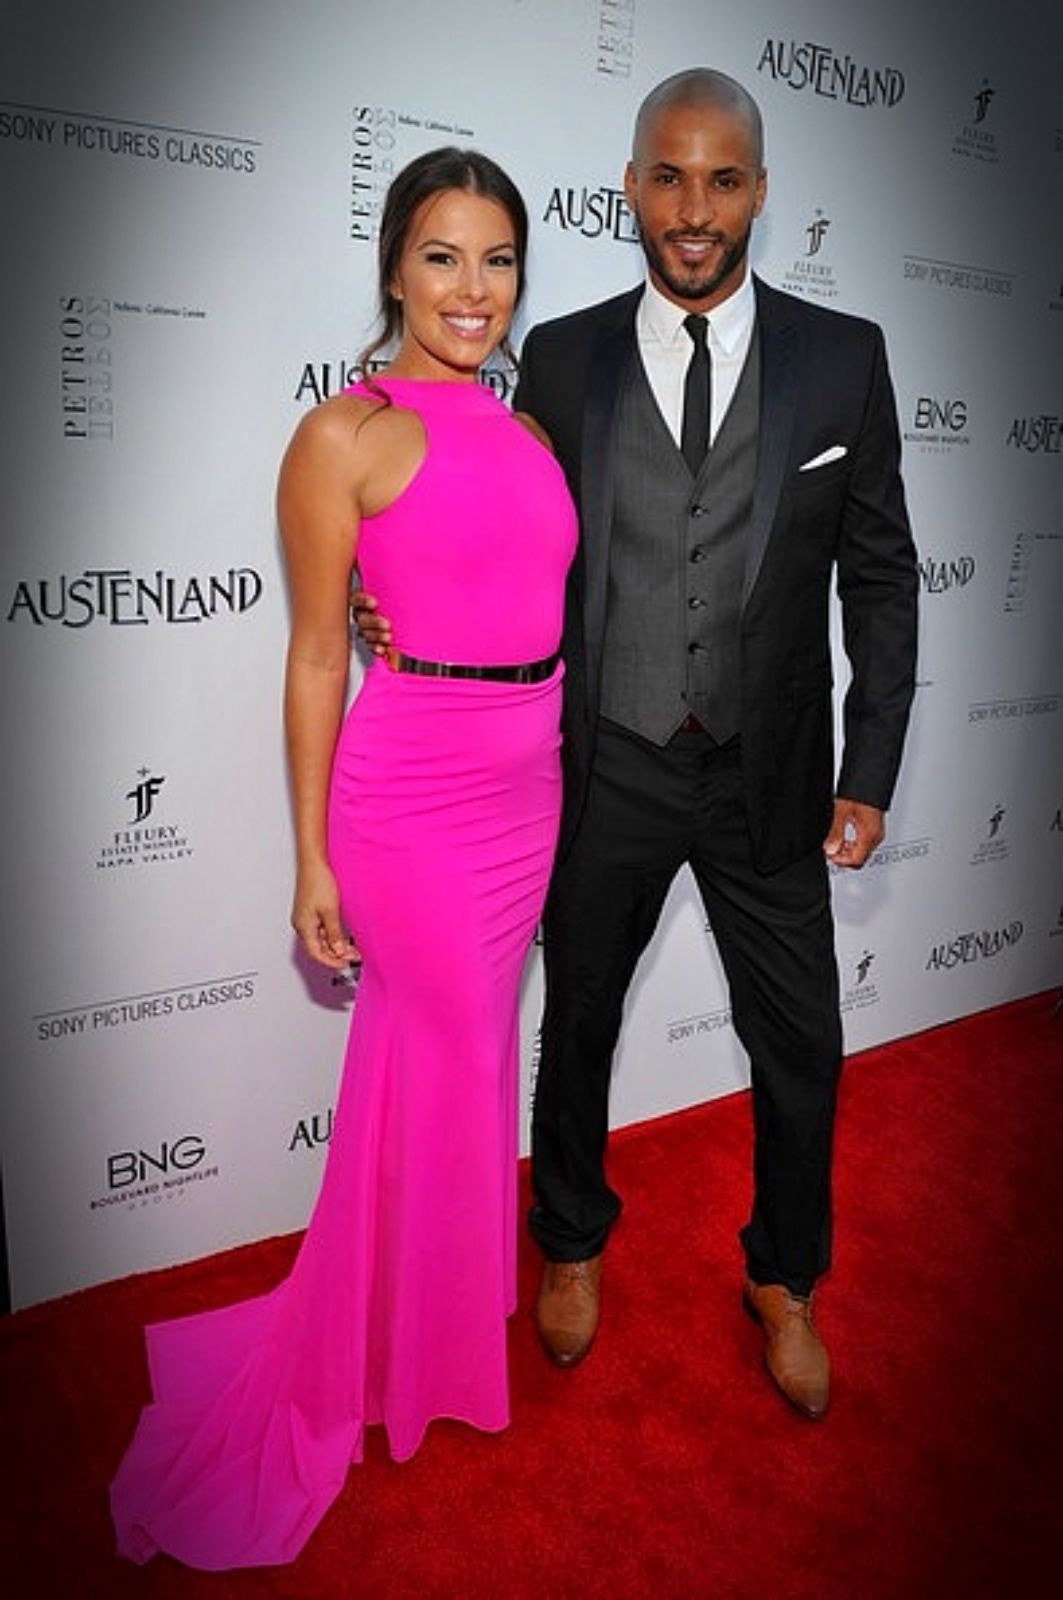 Austenland premiere red carpet arrivals Sandra Hinojosa and Ricky Whittle